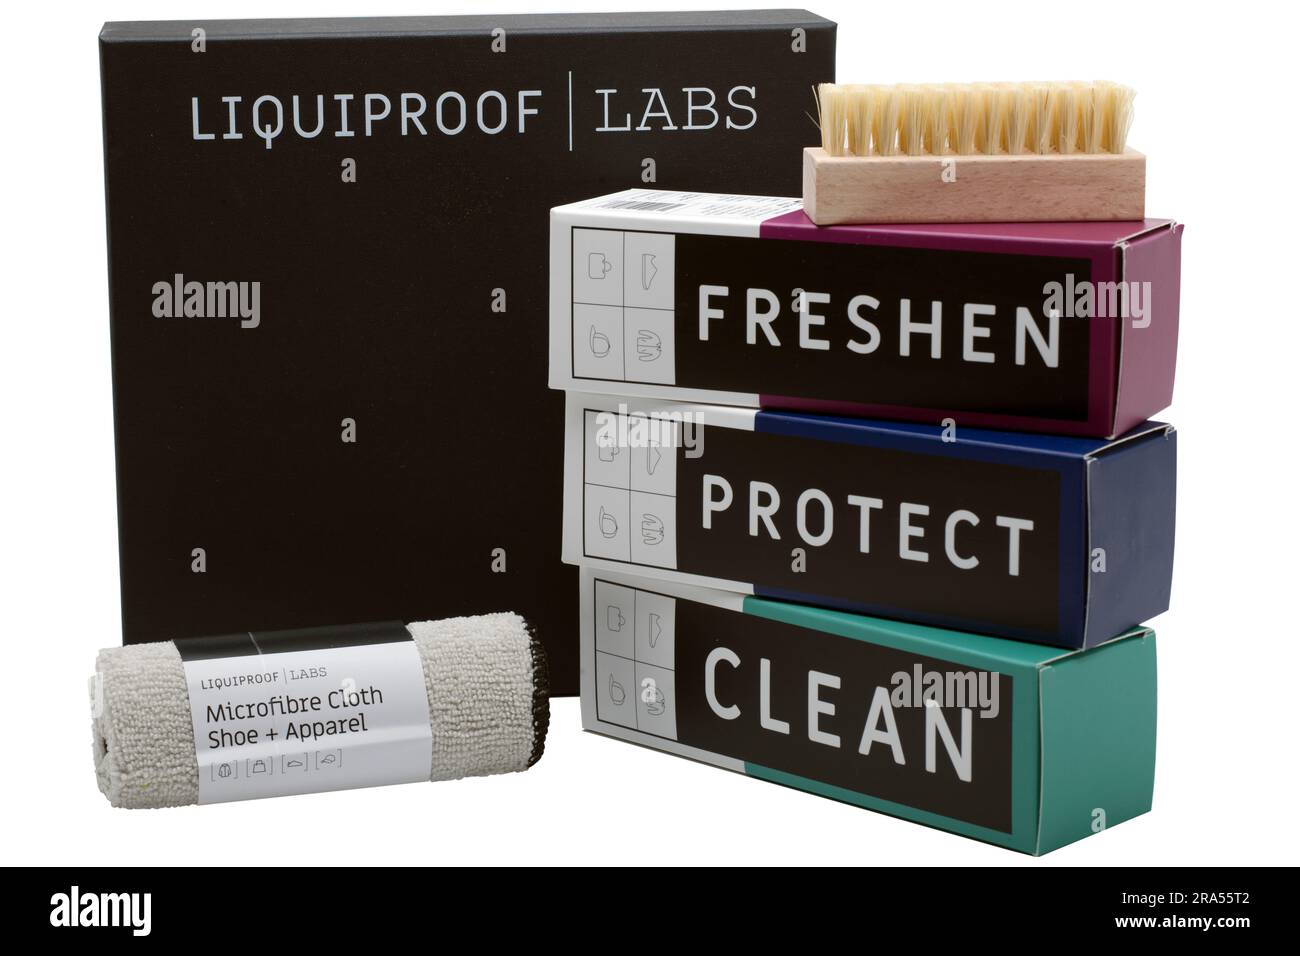 BOX CONTAINING LIQUIPROOF LABS COMPLETE SHOE CARE KIT Stock Photo